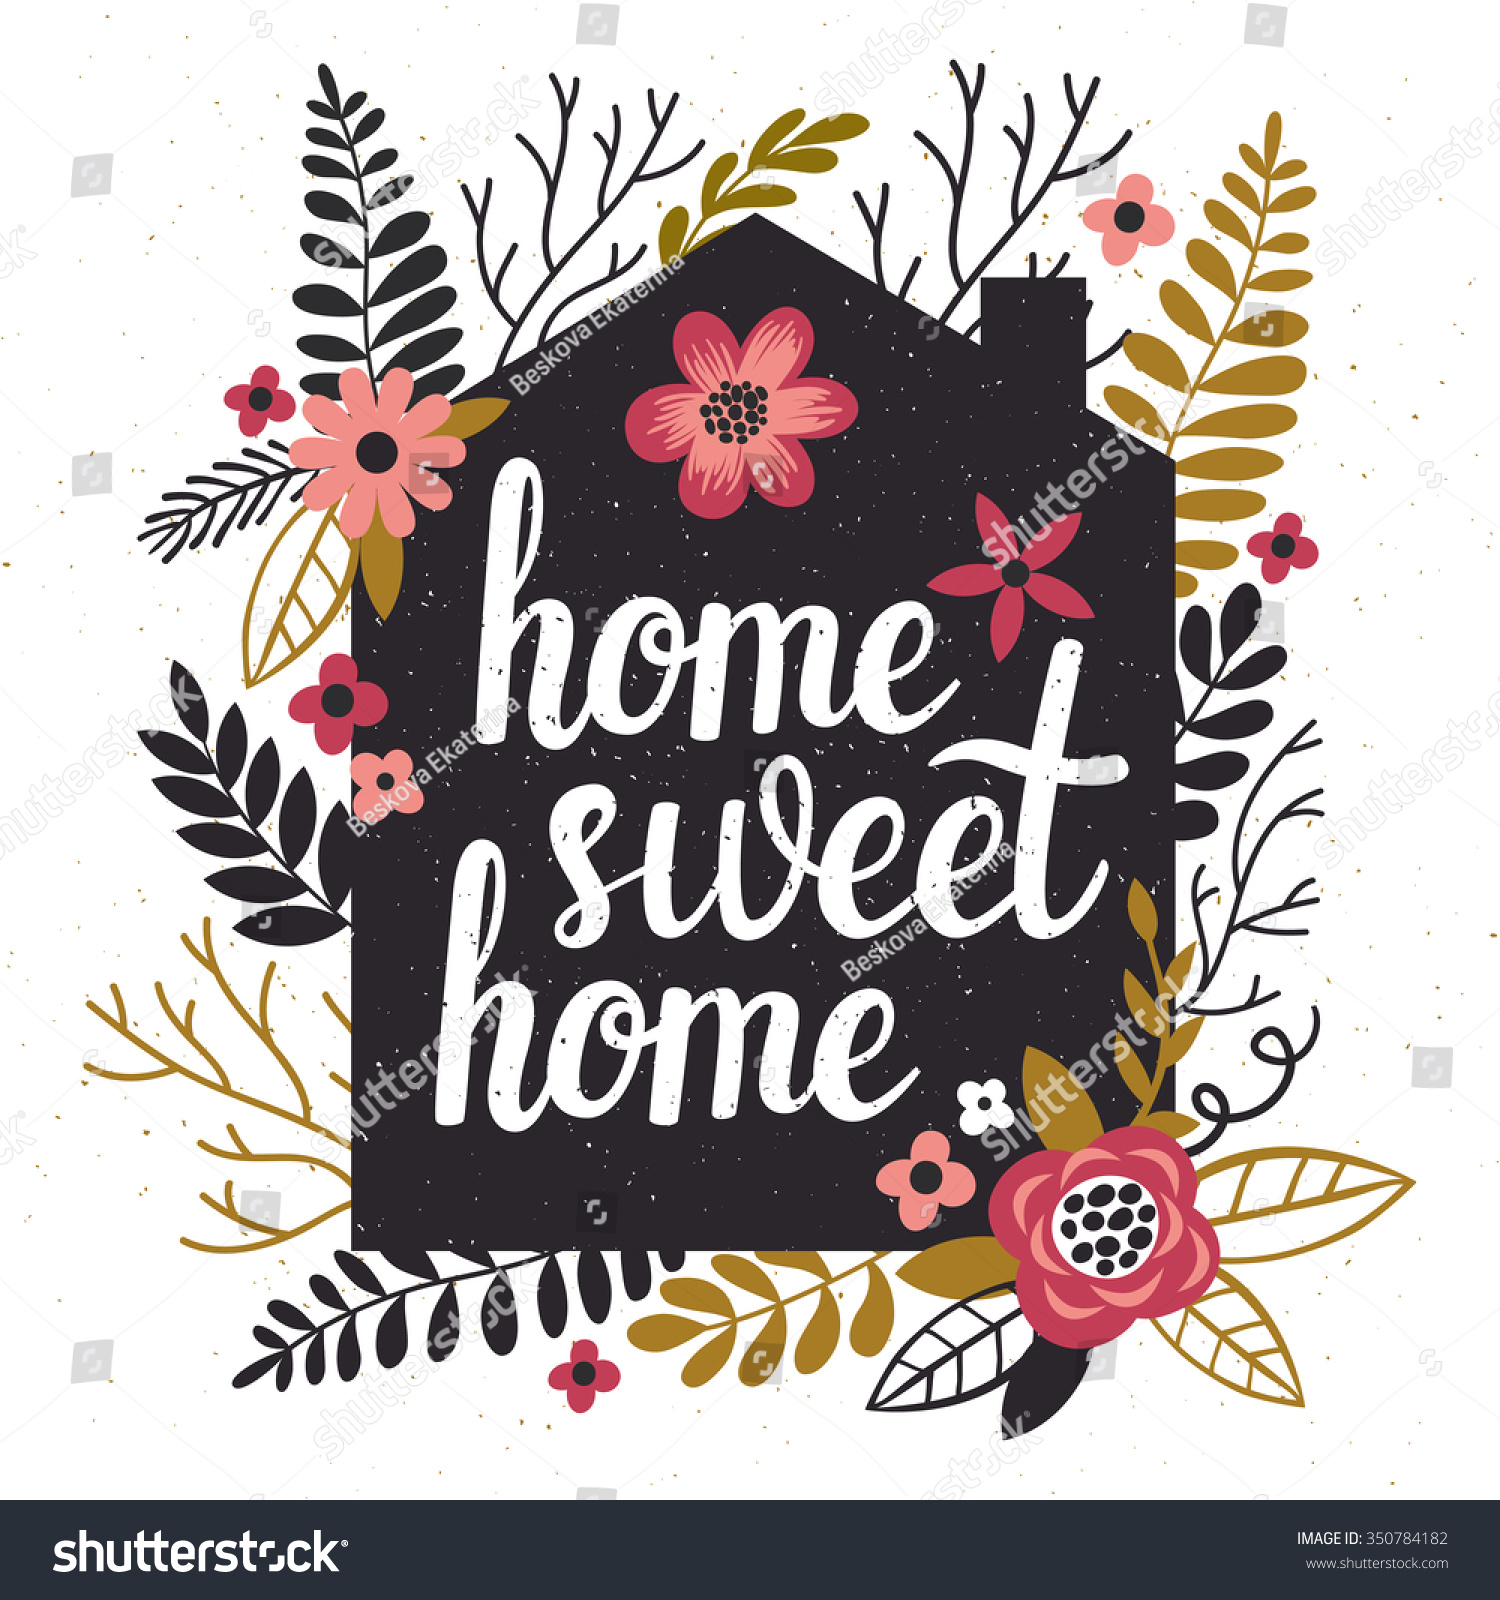 Download Vector Illustration Black Houses Silhouette Floral Stock ...